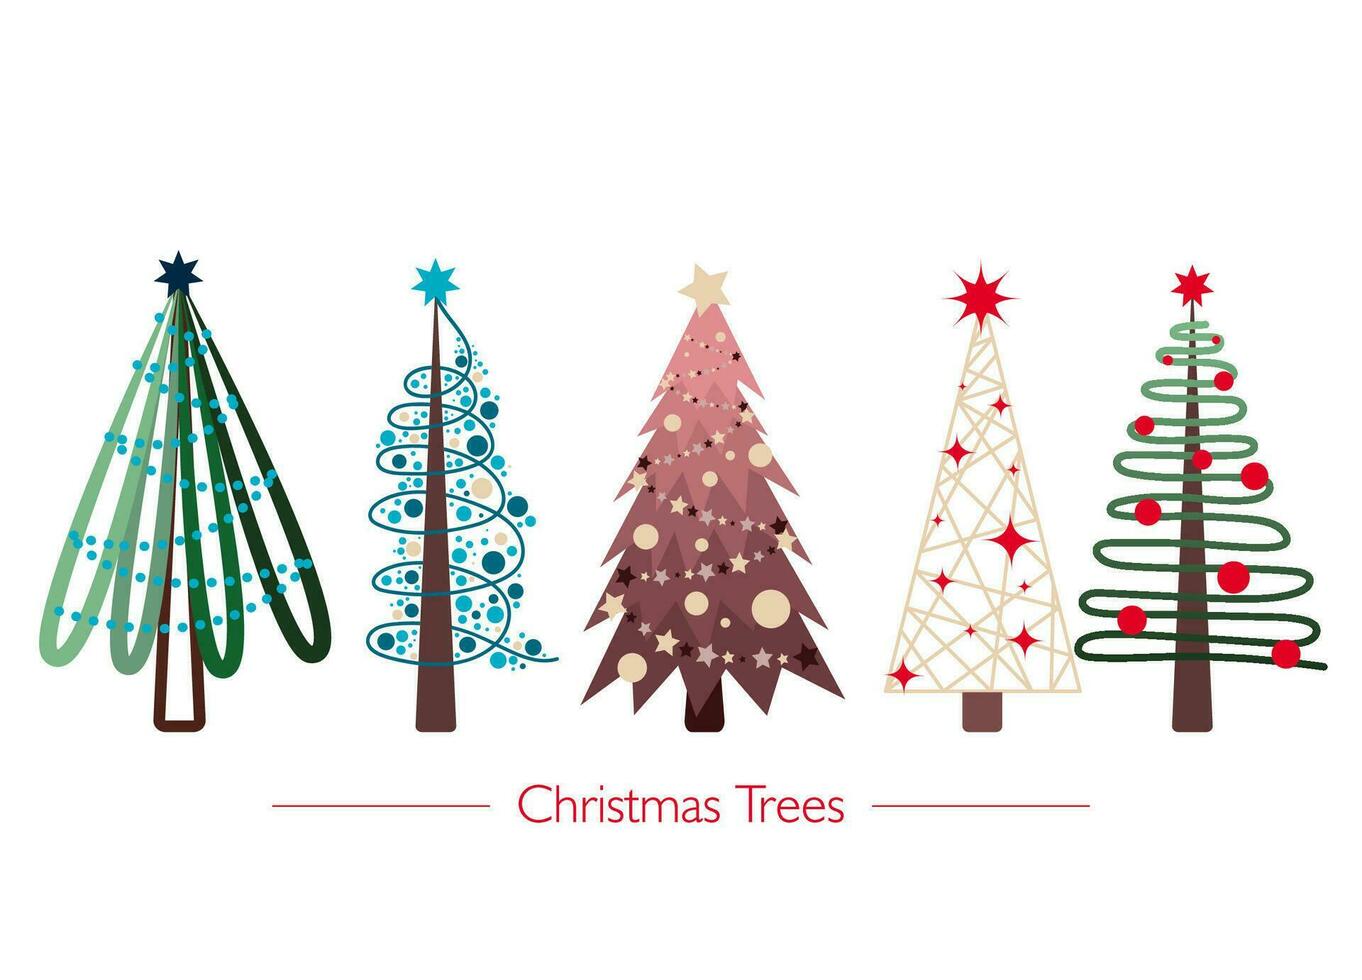 the set of five flat simple colorful cute christmas trees for xmas decorations vector